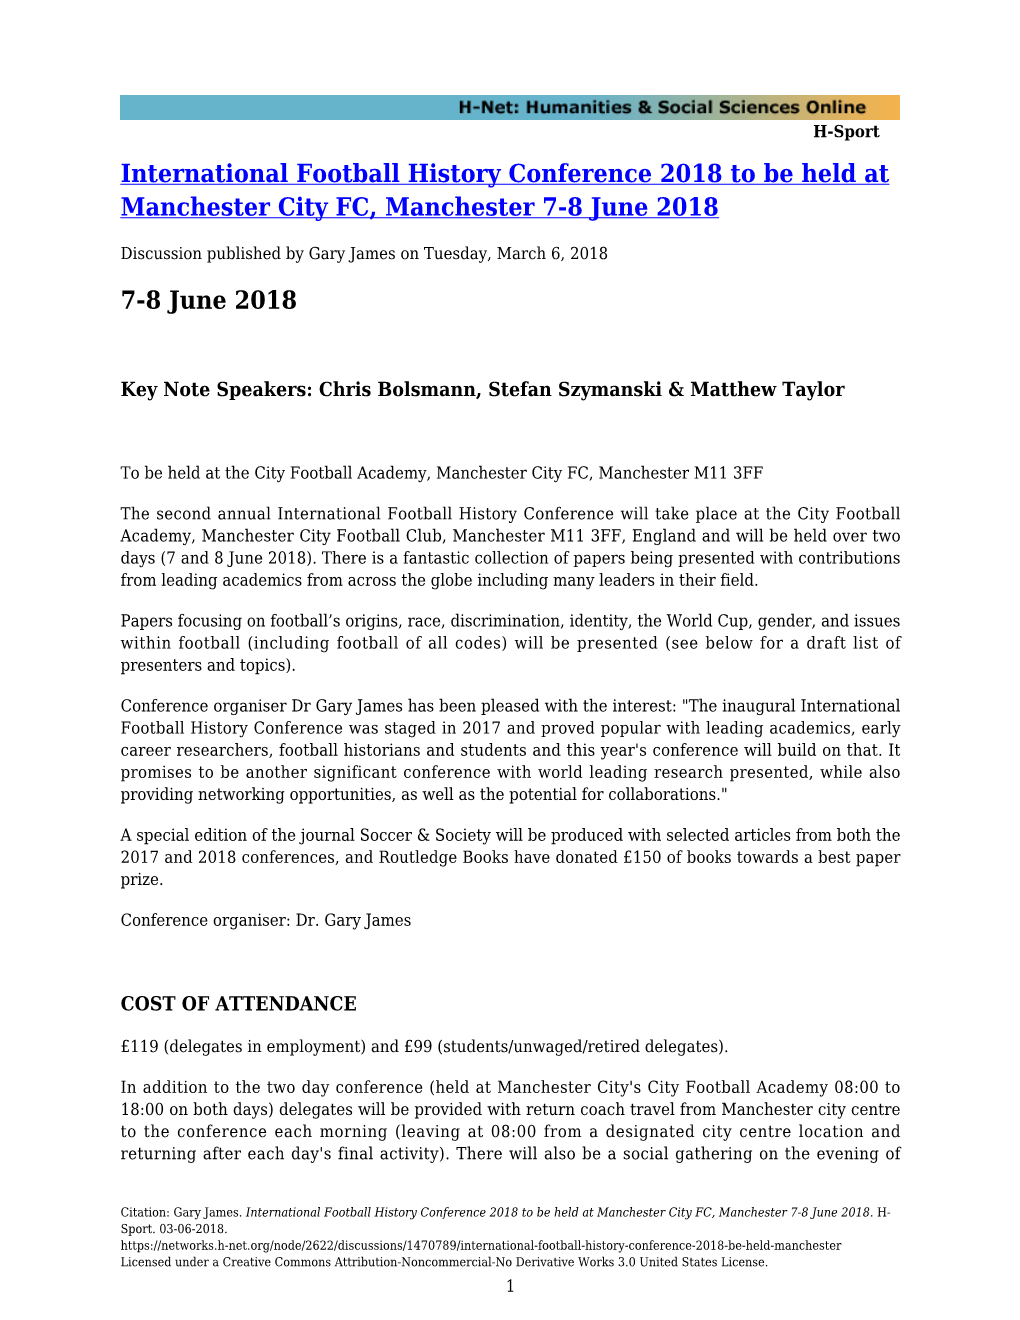 International Football History Conference 2018 to Be Held at Manchester City FC, Manchester 7-8 June 2018